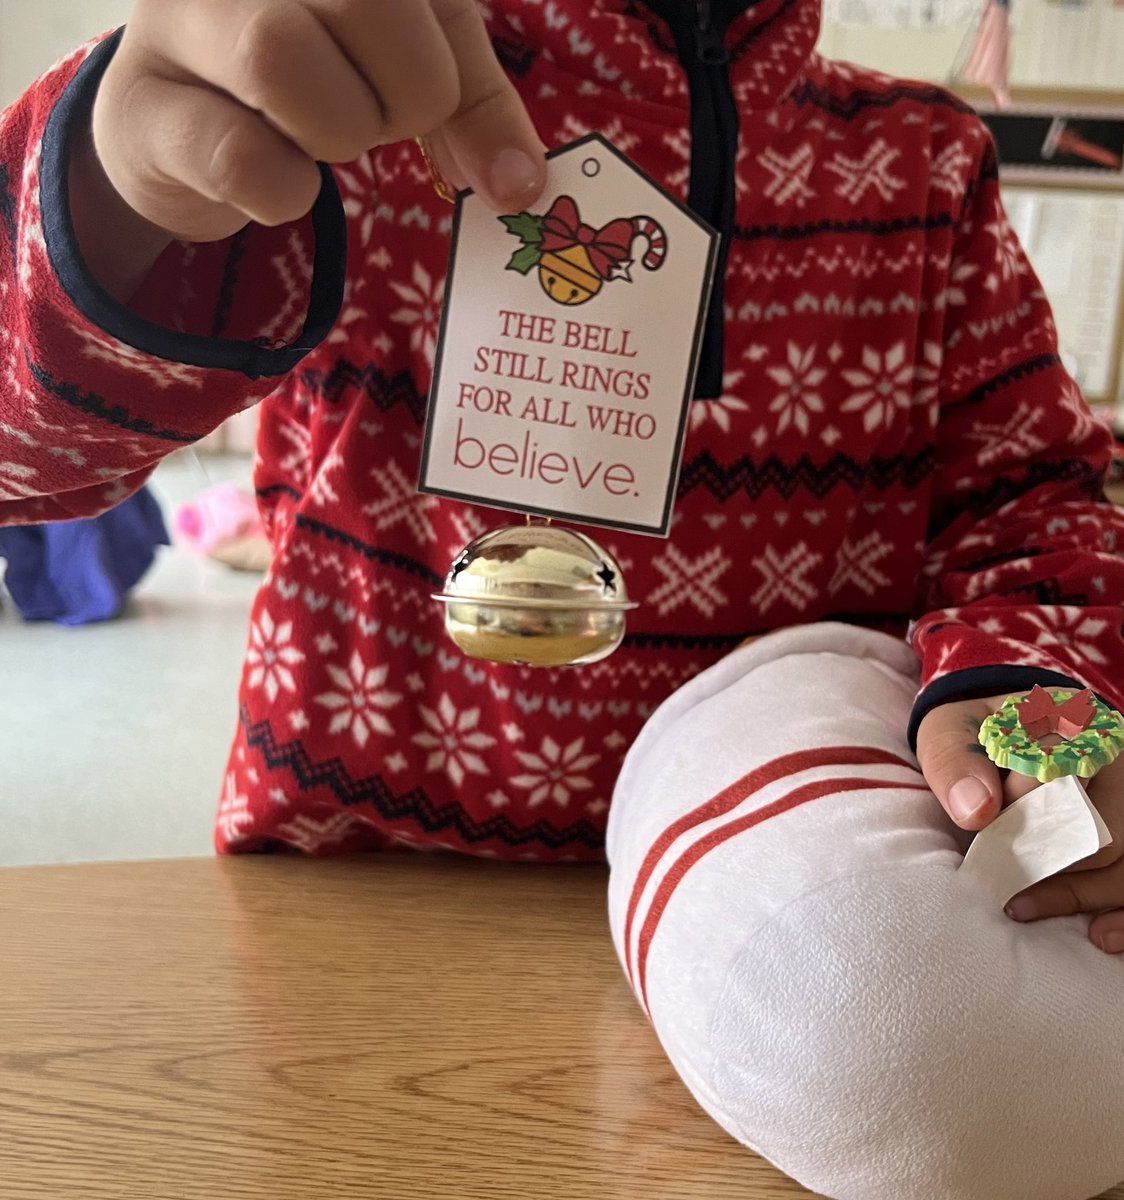 The bell still rings for us. As it does for all those who truly believe. 🎅🏼#polarexpress #pajamaday